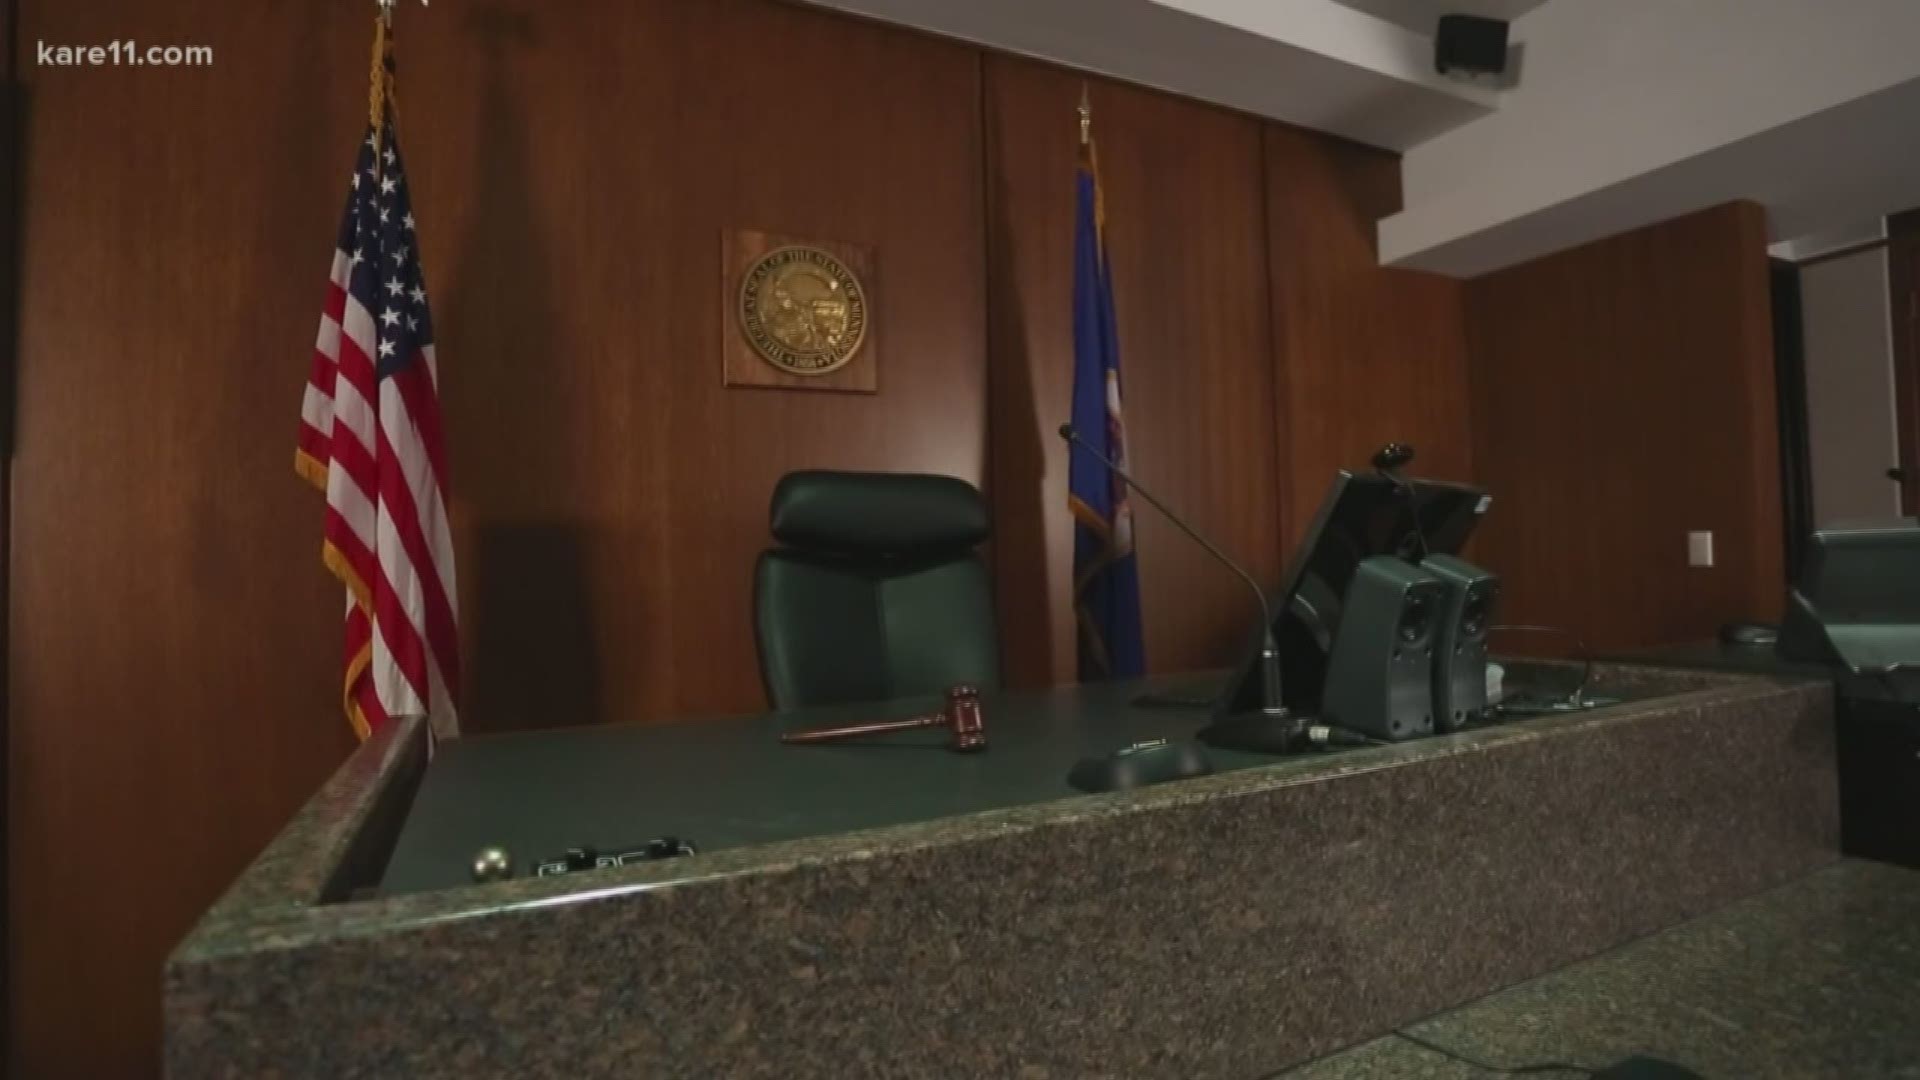 Court hearings are still happening for emergency situations, but jury trials are on hold.